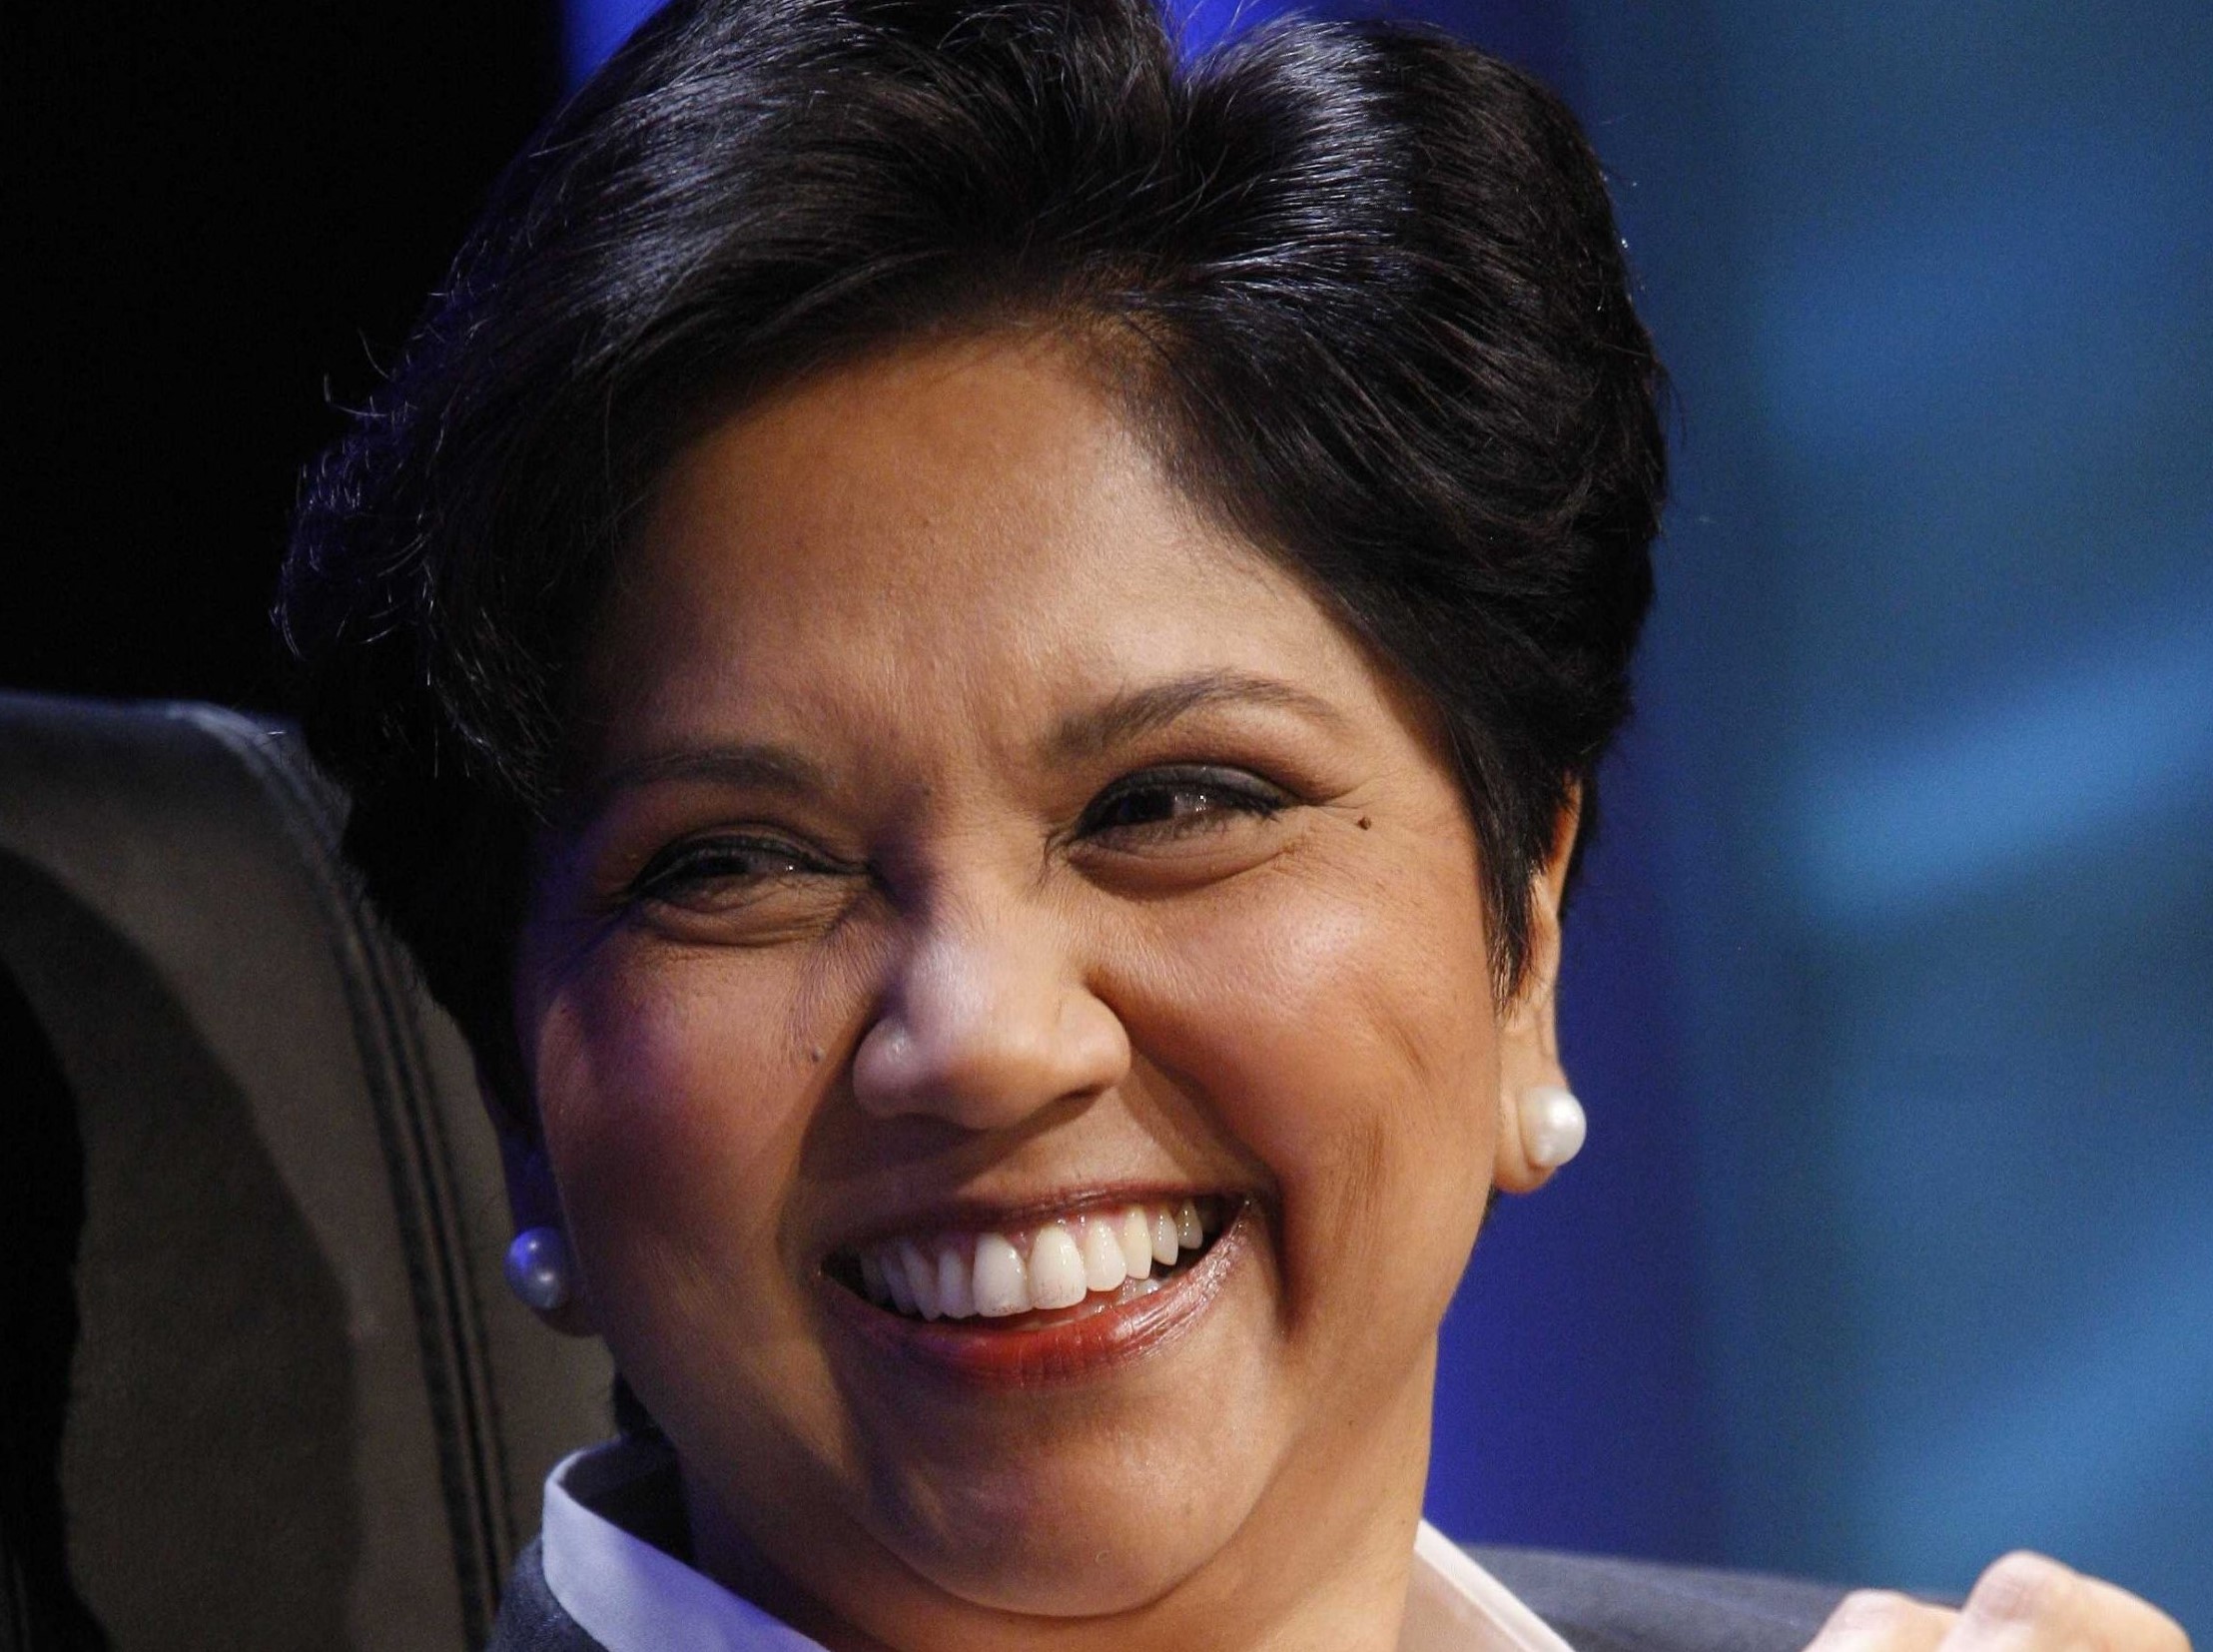 Indra Nooyi being considered to lead World Bank, says report